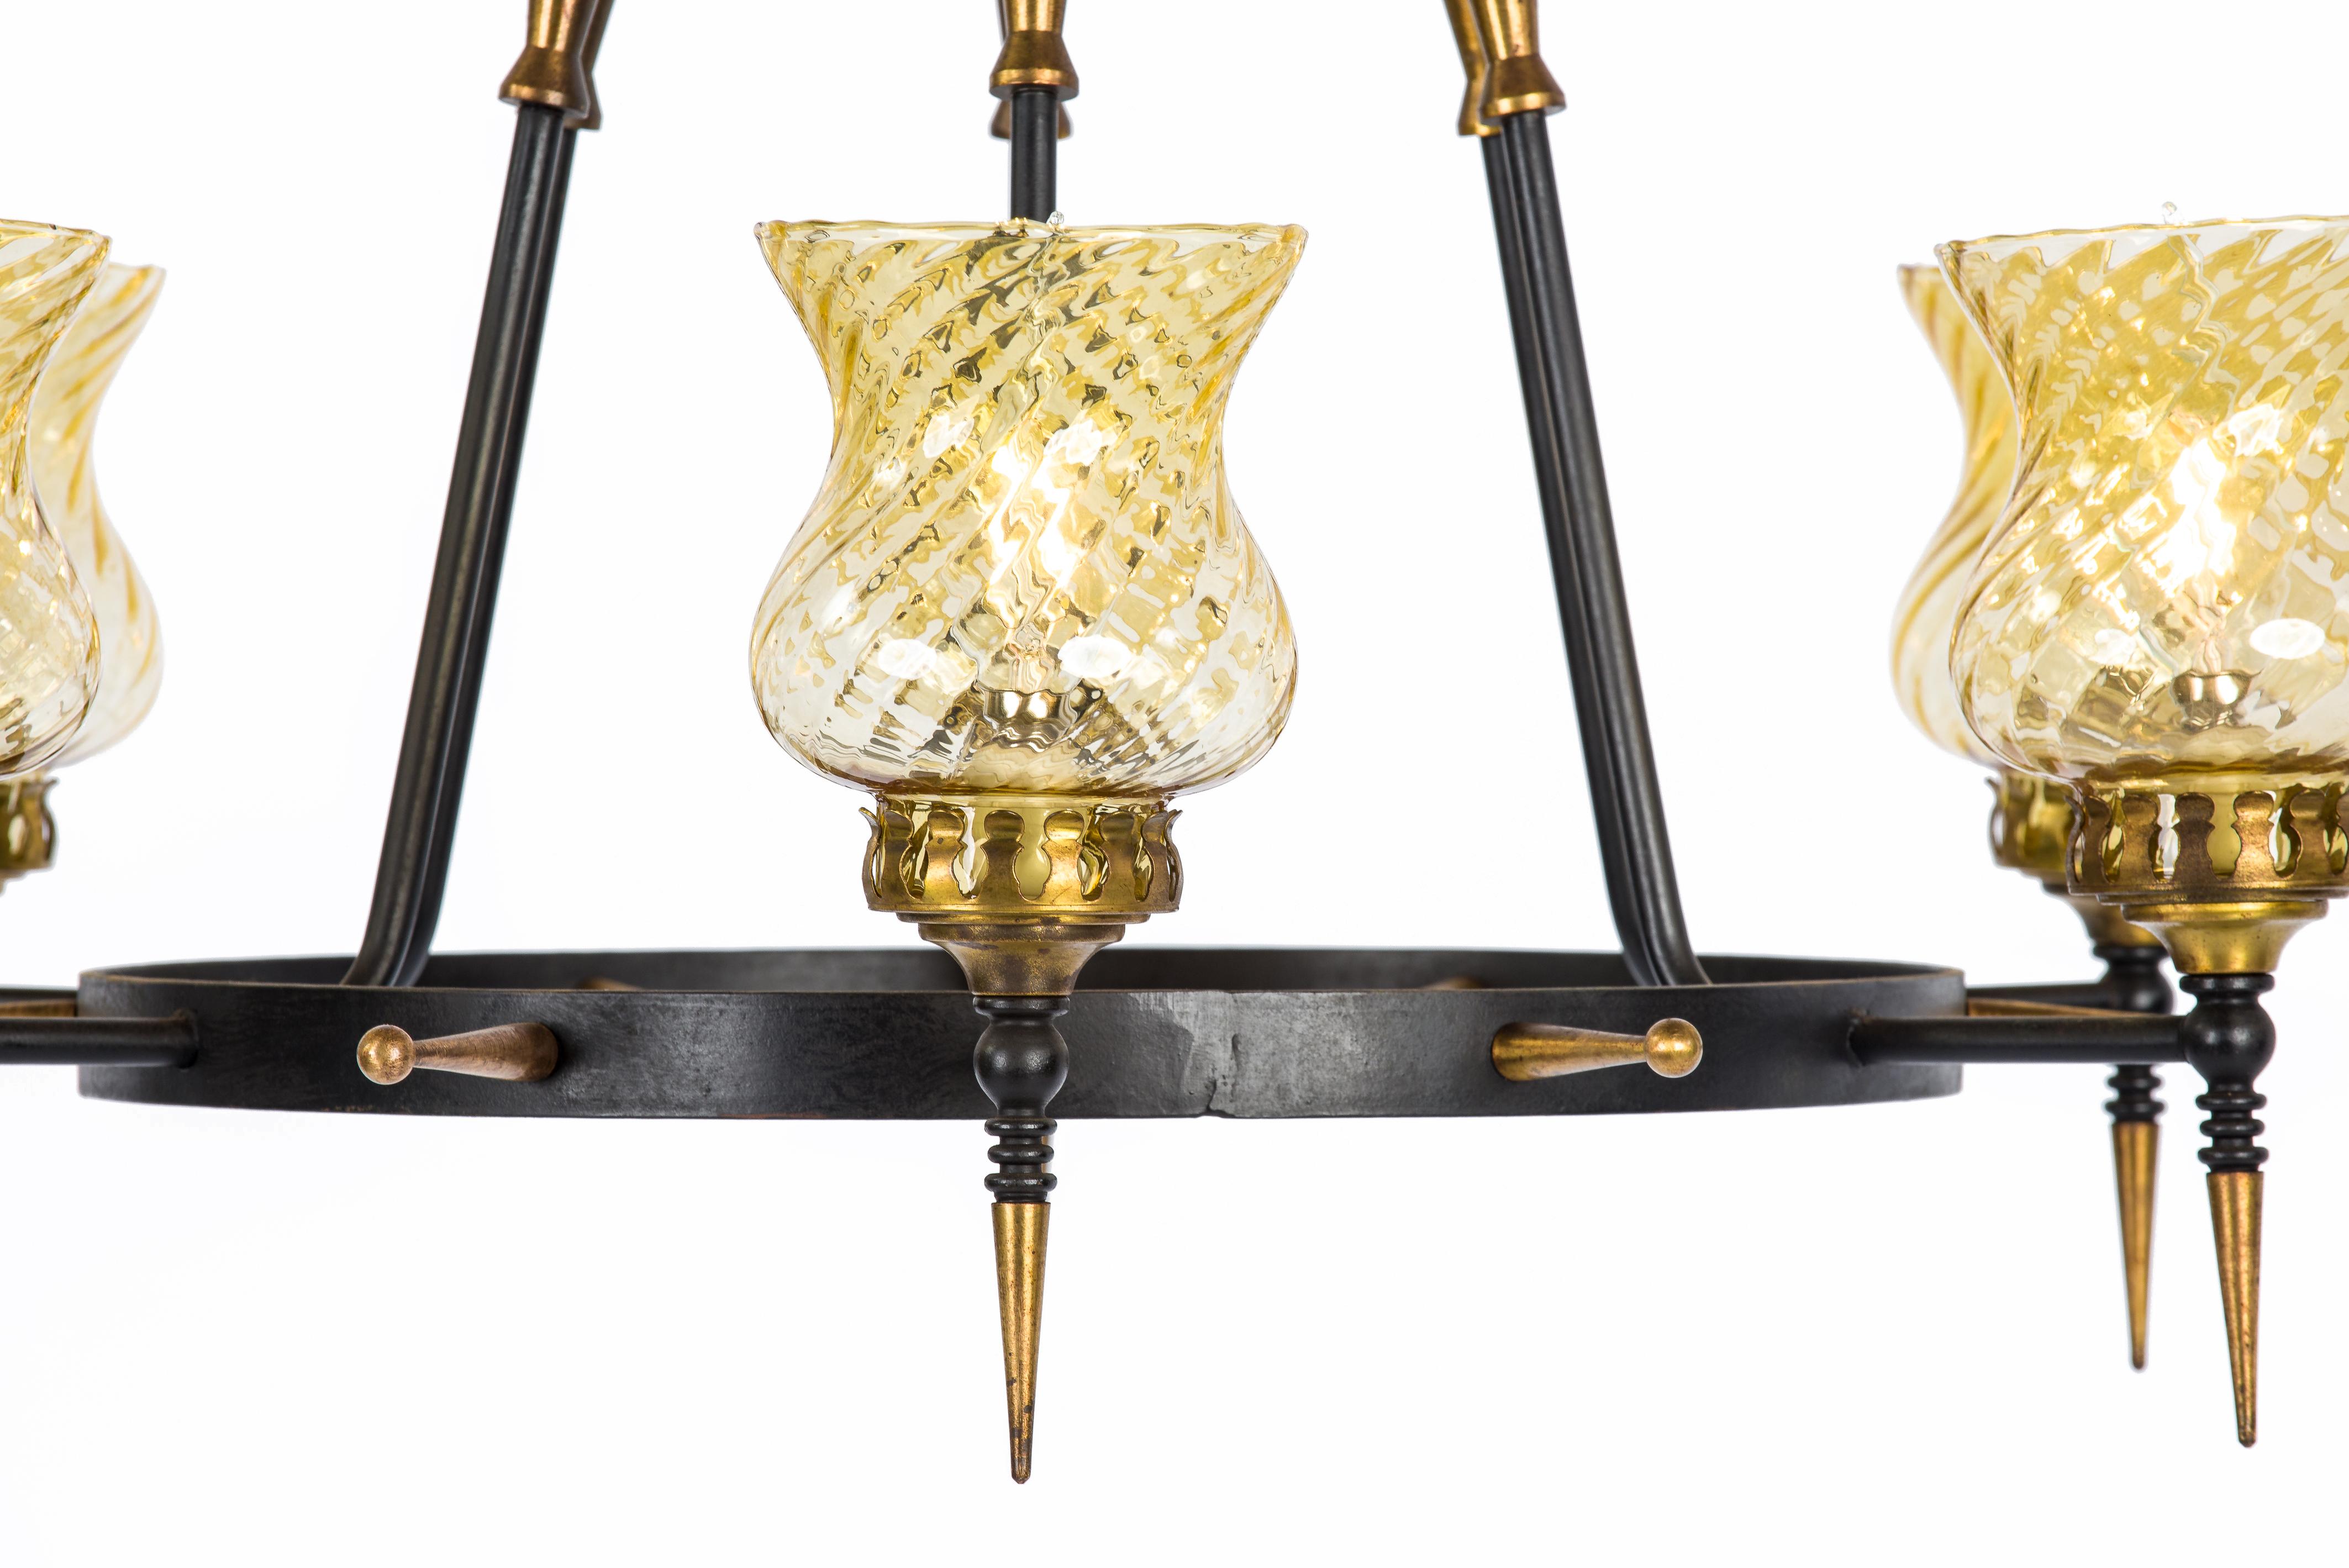 This elegant chandelier was made in France in the 1960s. It features a black patinated steel ring supporting 6 brass torches. The torches end with beautiful yellow twisted glass covers. This one-of-a-kind chandelier was made by a true craftsman and